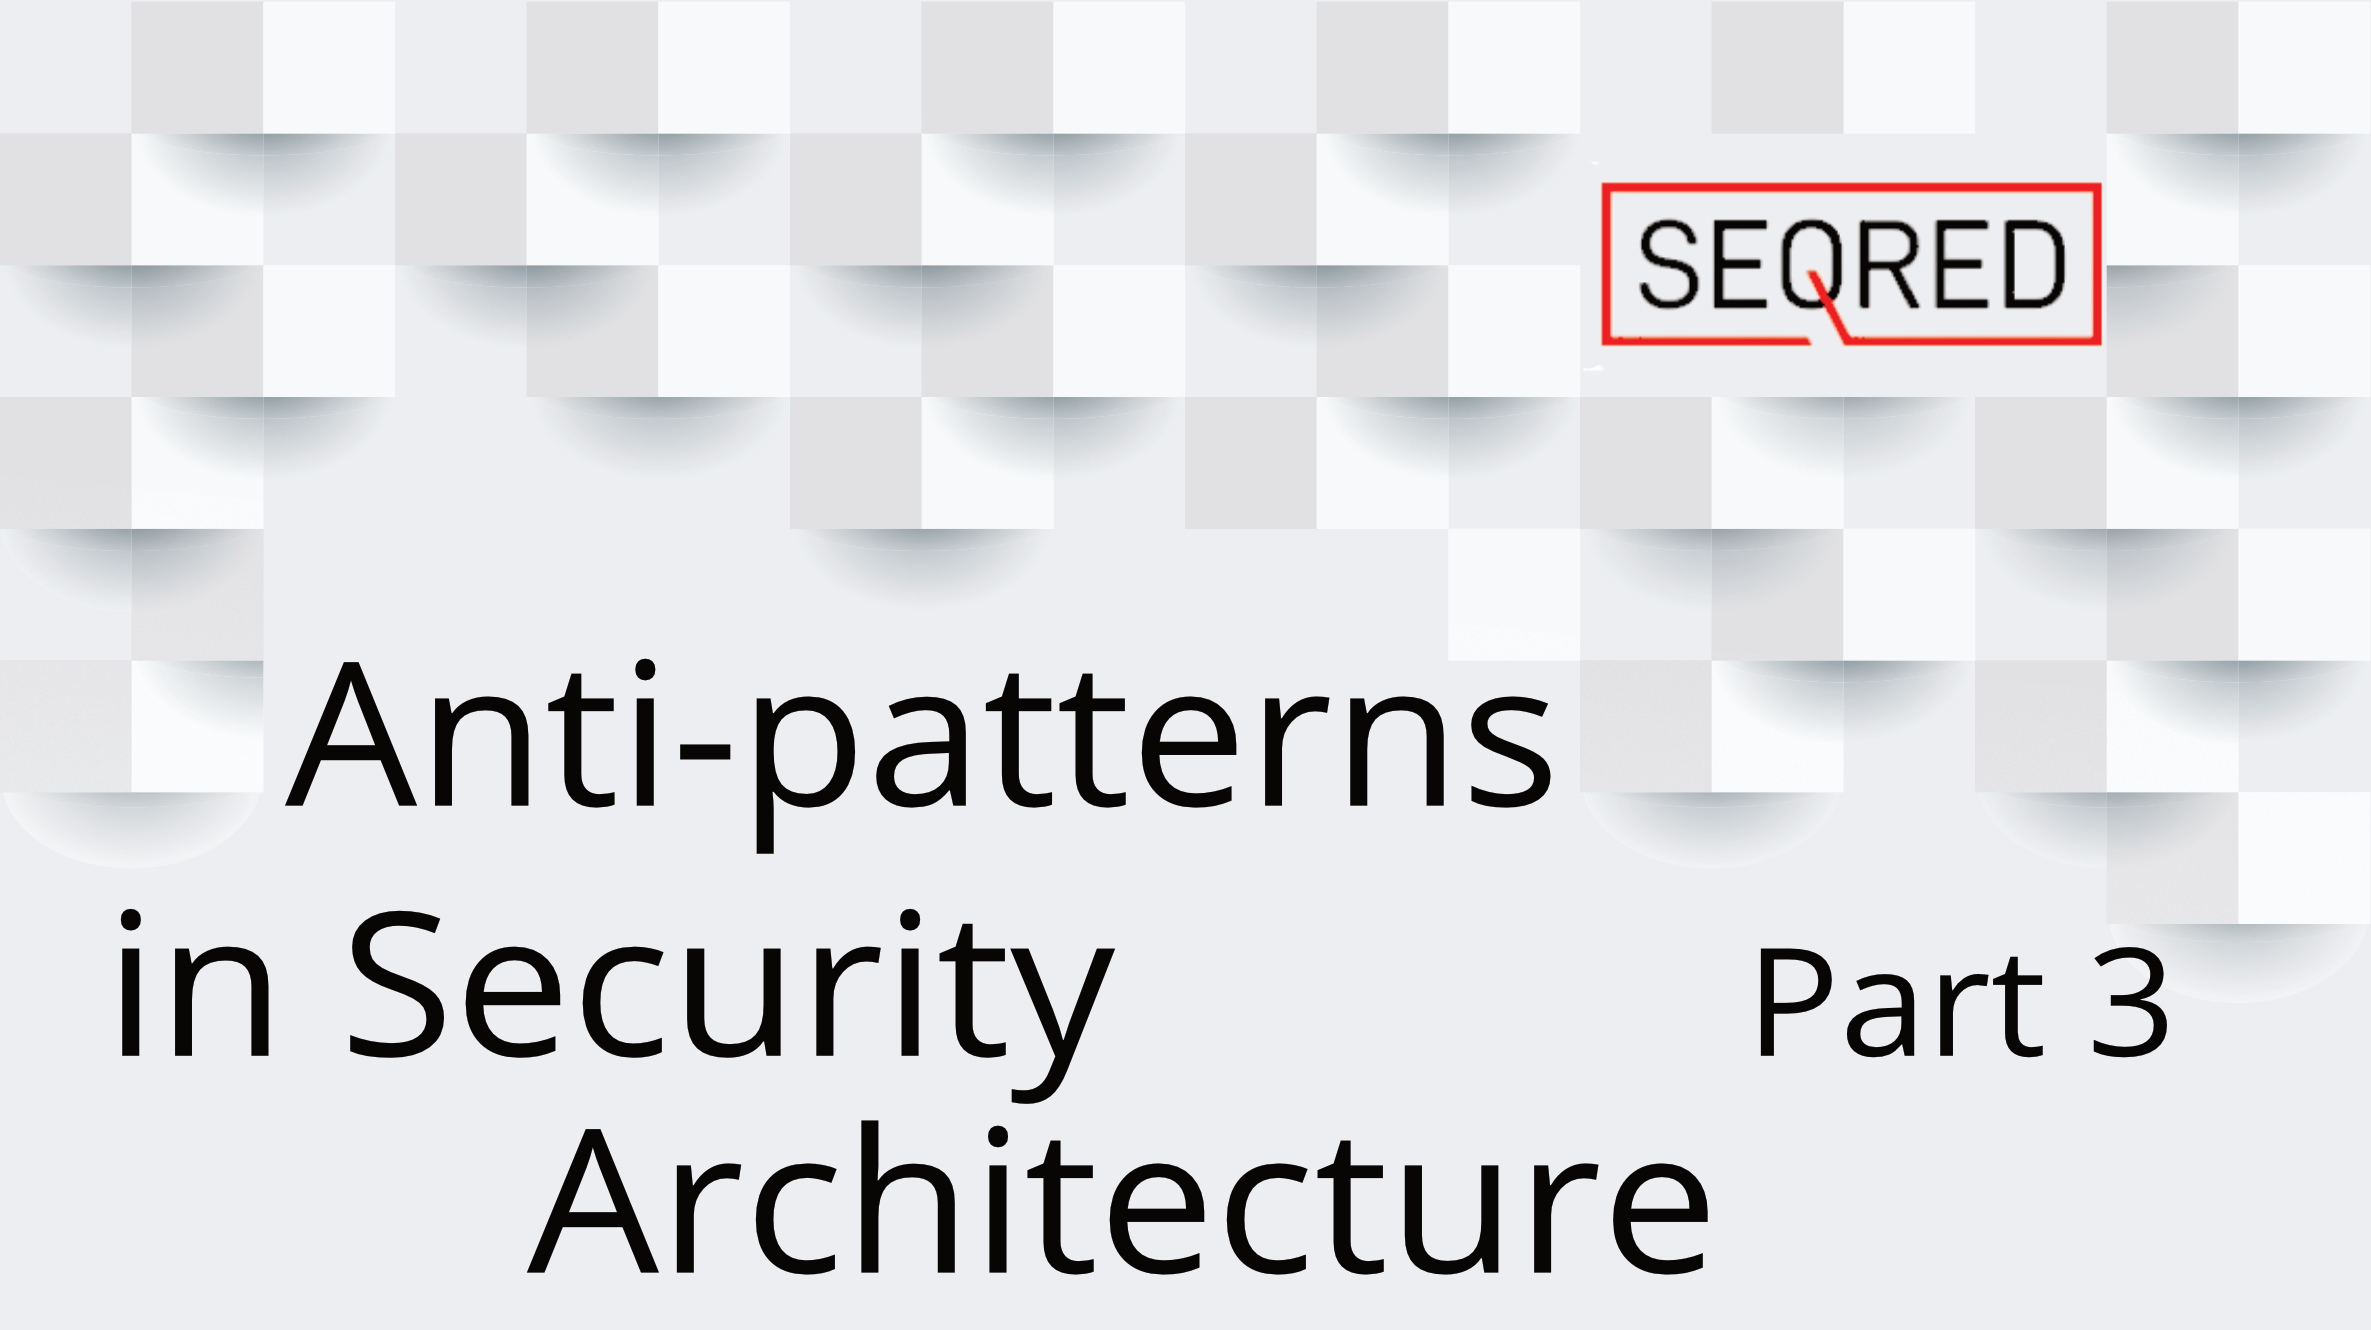 Anti-pattern s in security architecture